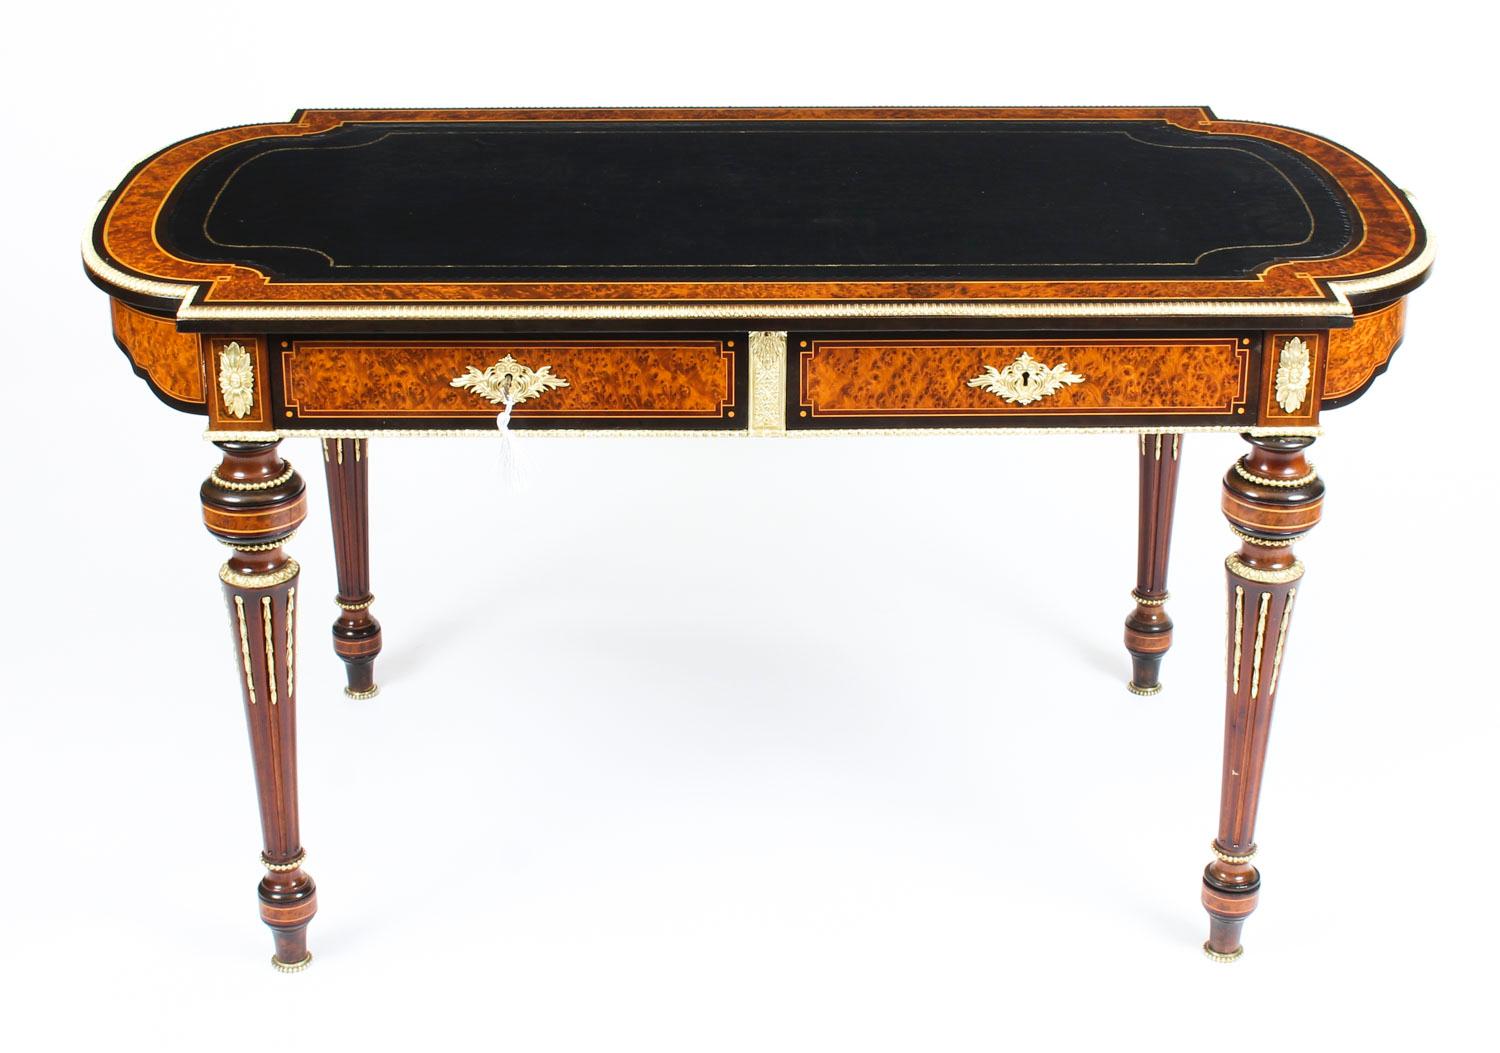 An elegant antique English Victorian burr walnut and ebonized writing table, circa 1870 in date.

The shaped burr walnut and line inlaid top features a striking ormolu border with a gold tooled inset black leather writing surface above twin fitted